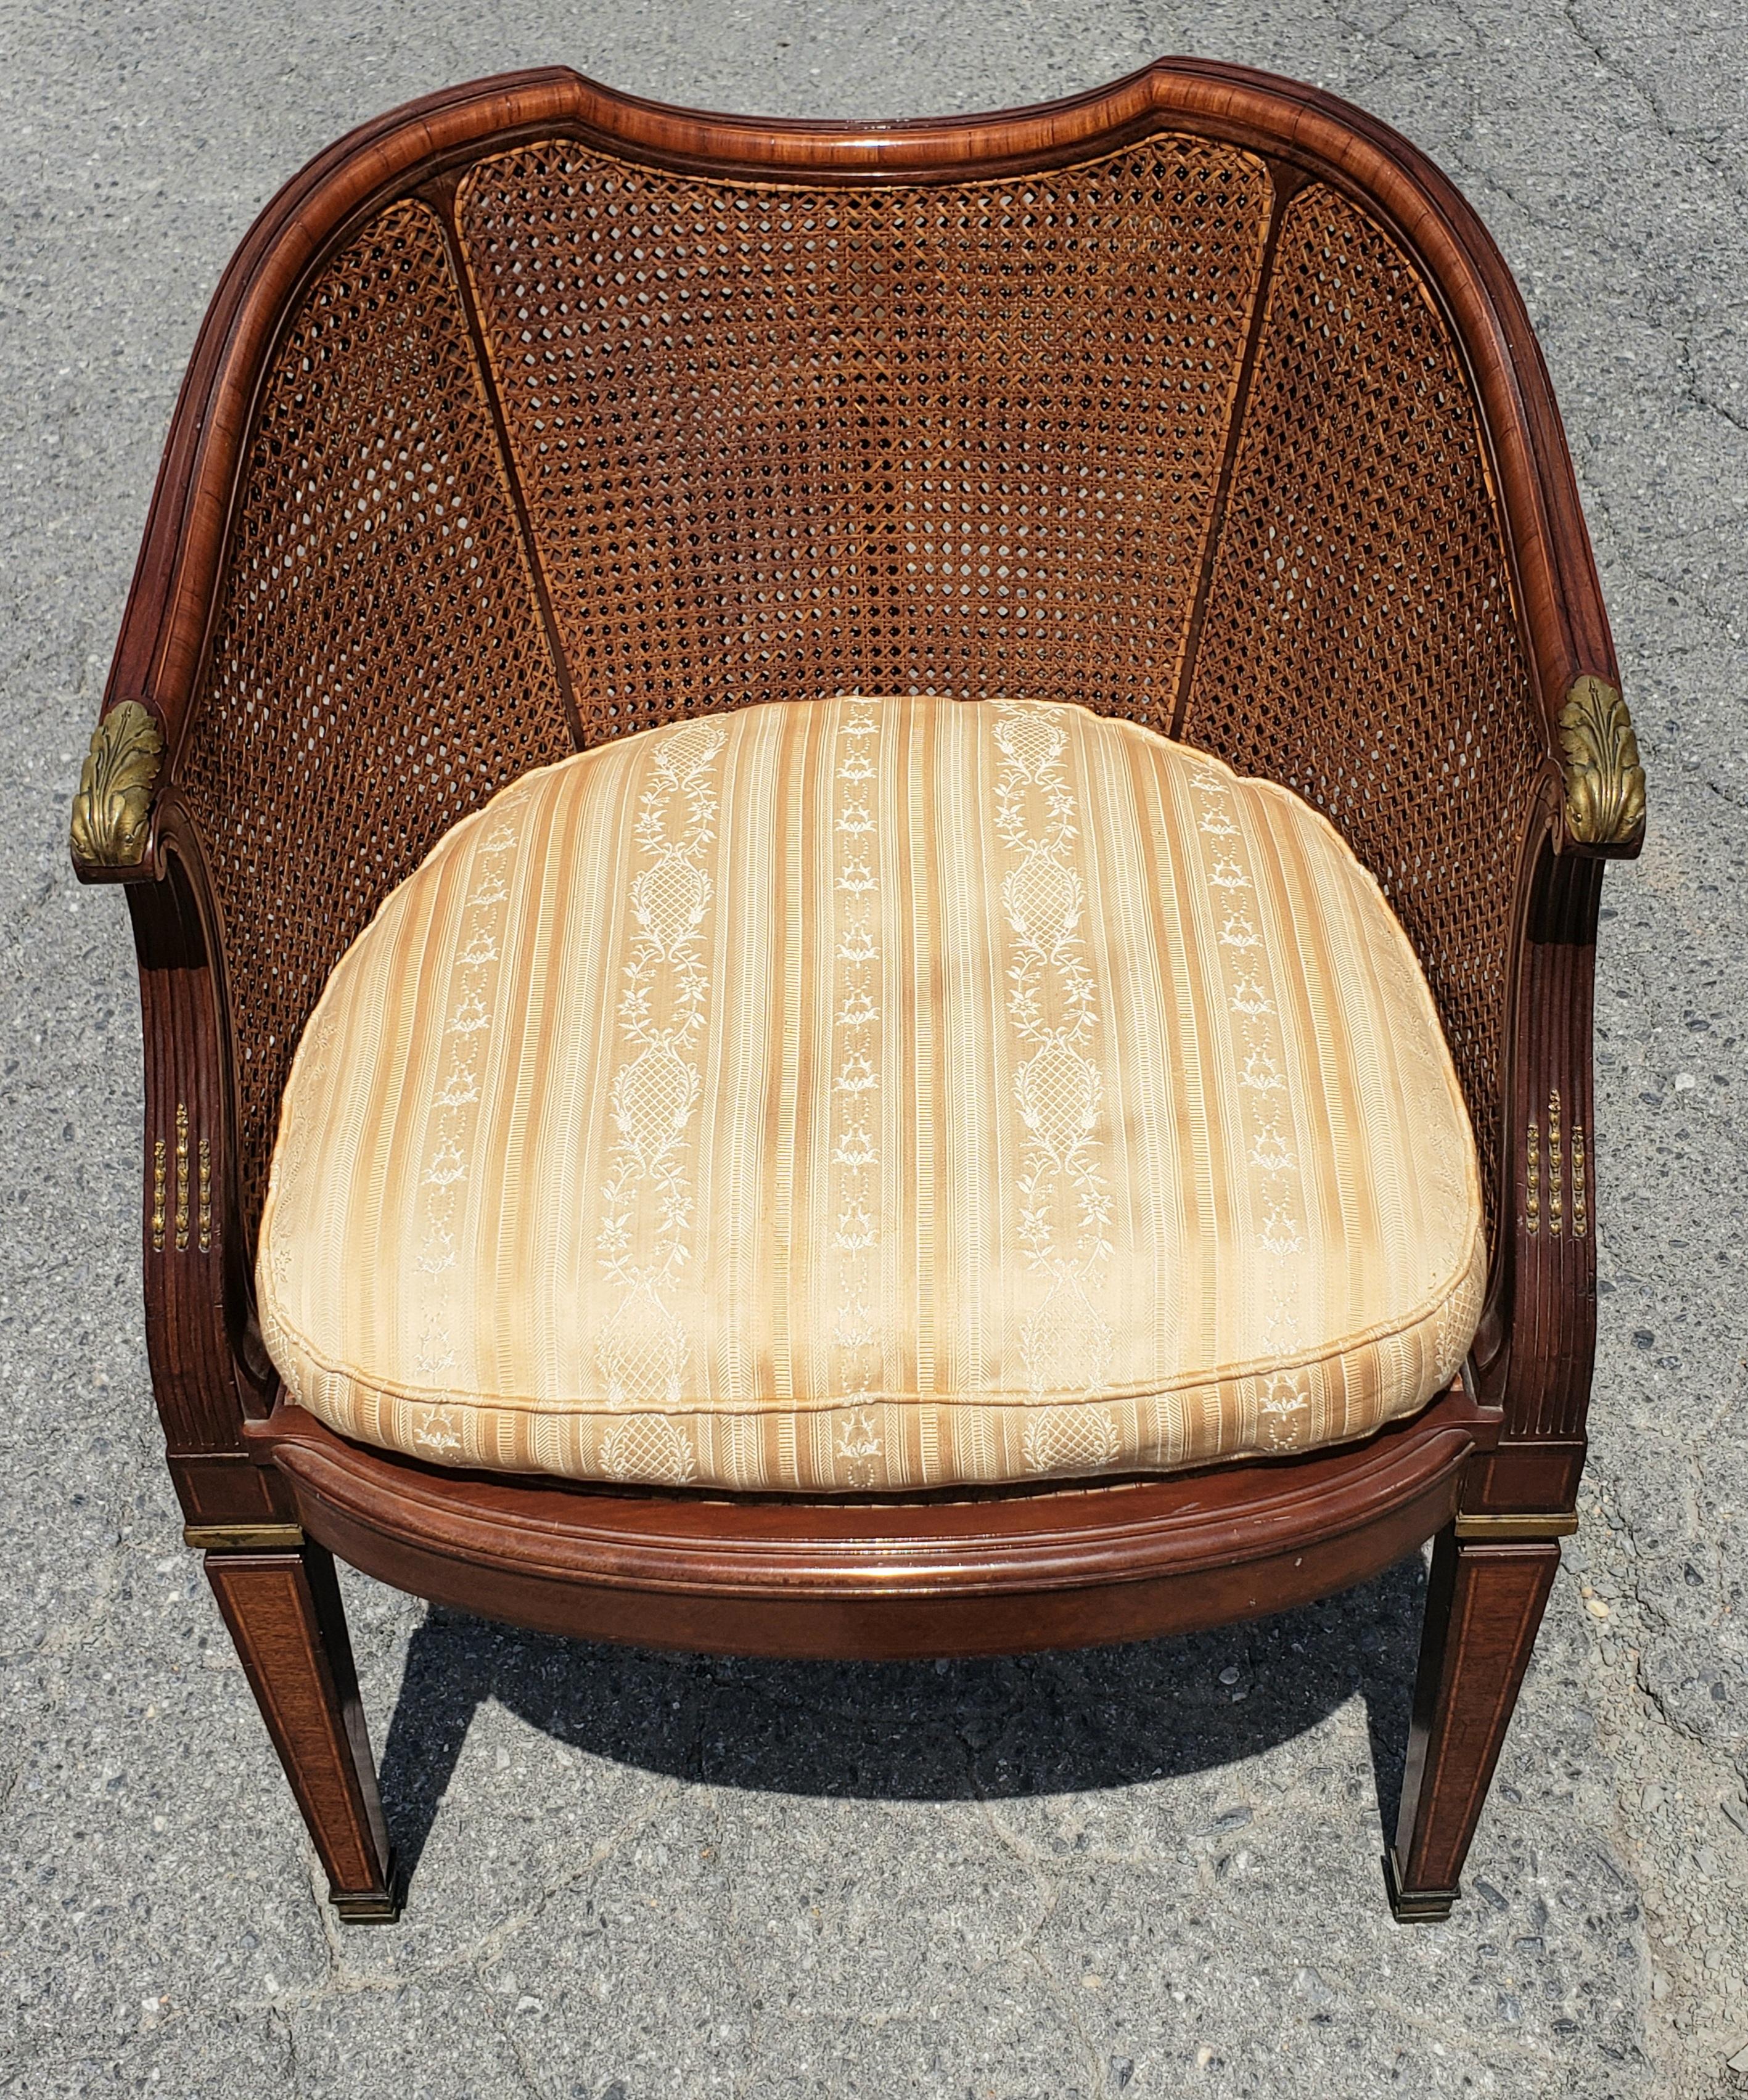 French Louis XV Transitional Mahogany and Kingwood Marquetry Burl and Cane Barrel Chair For Sale